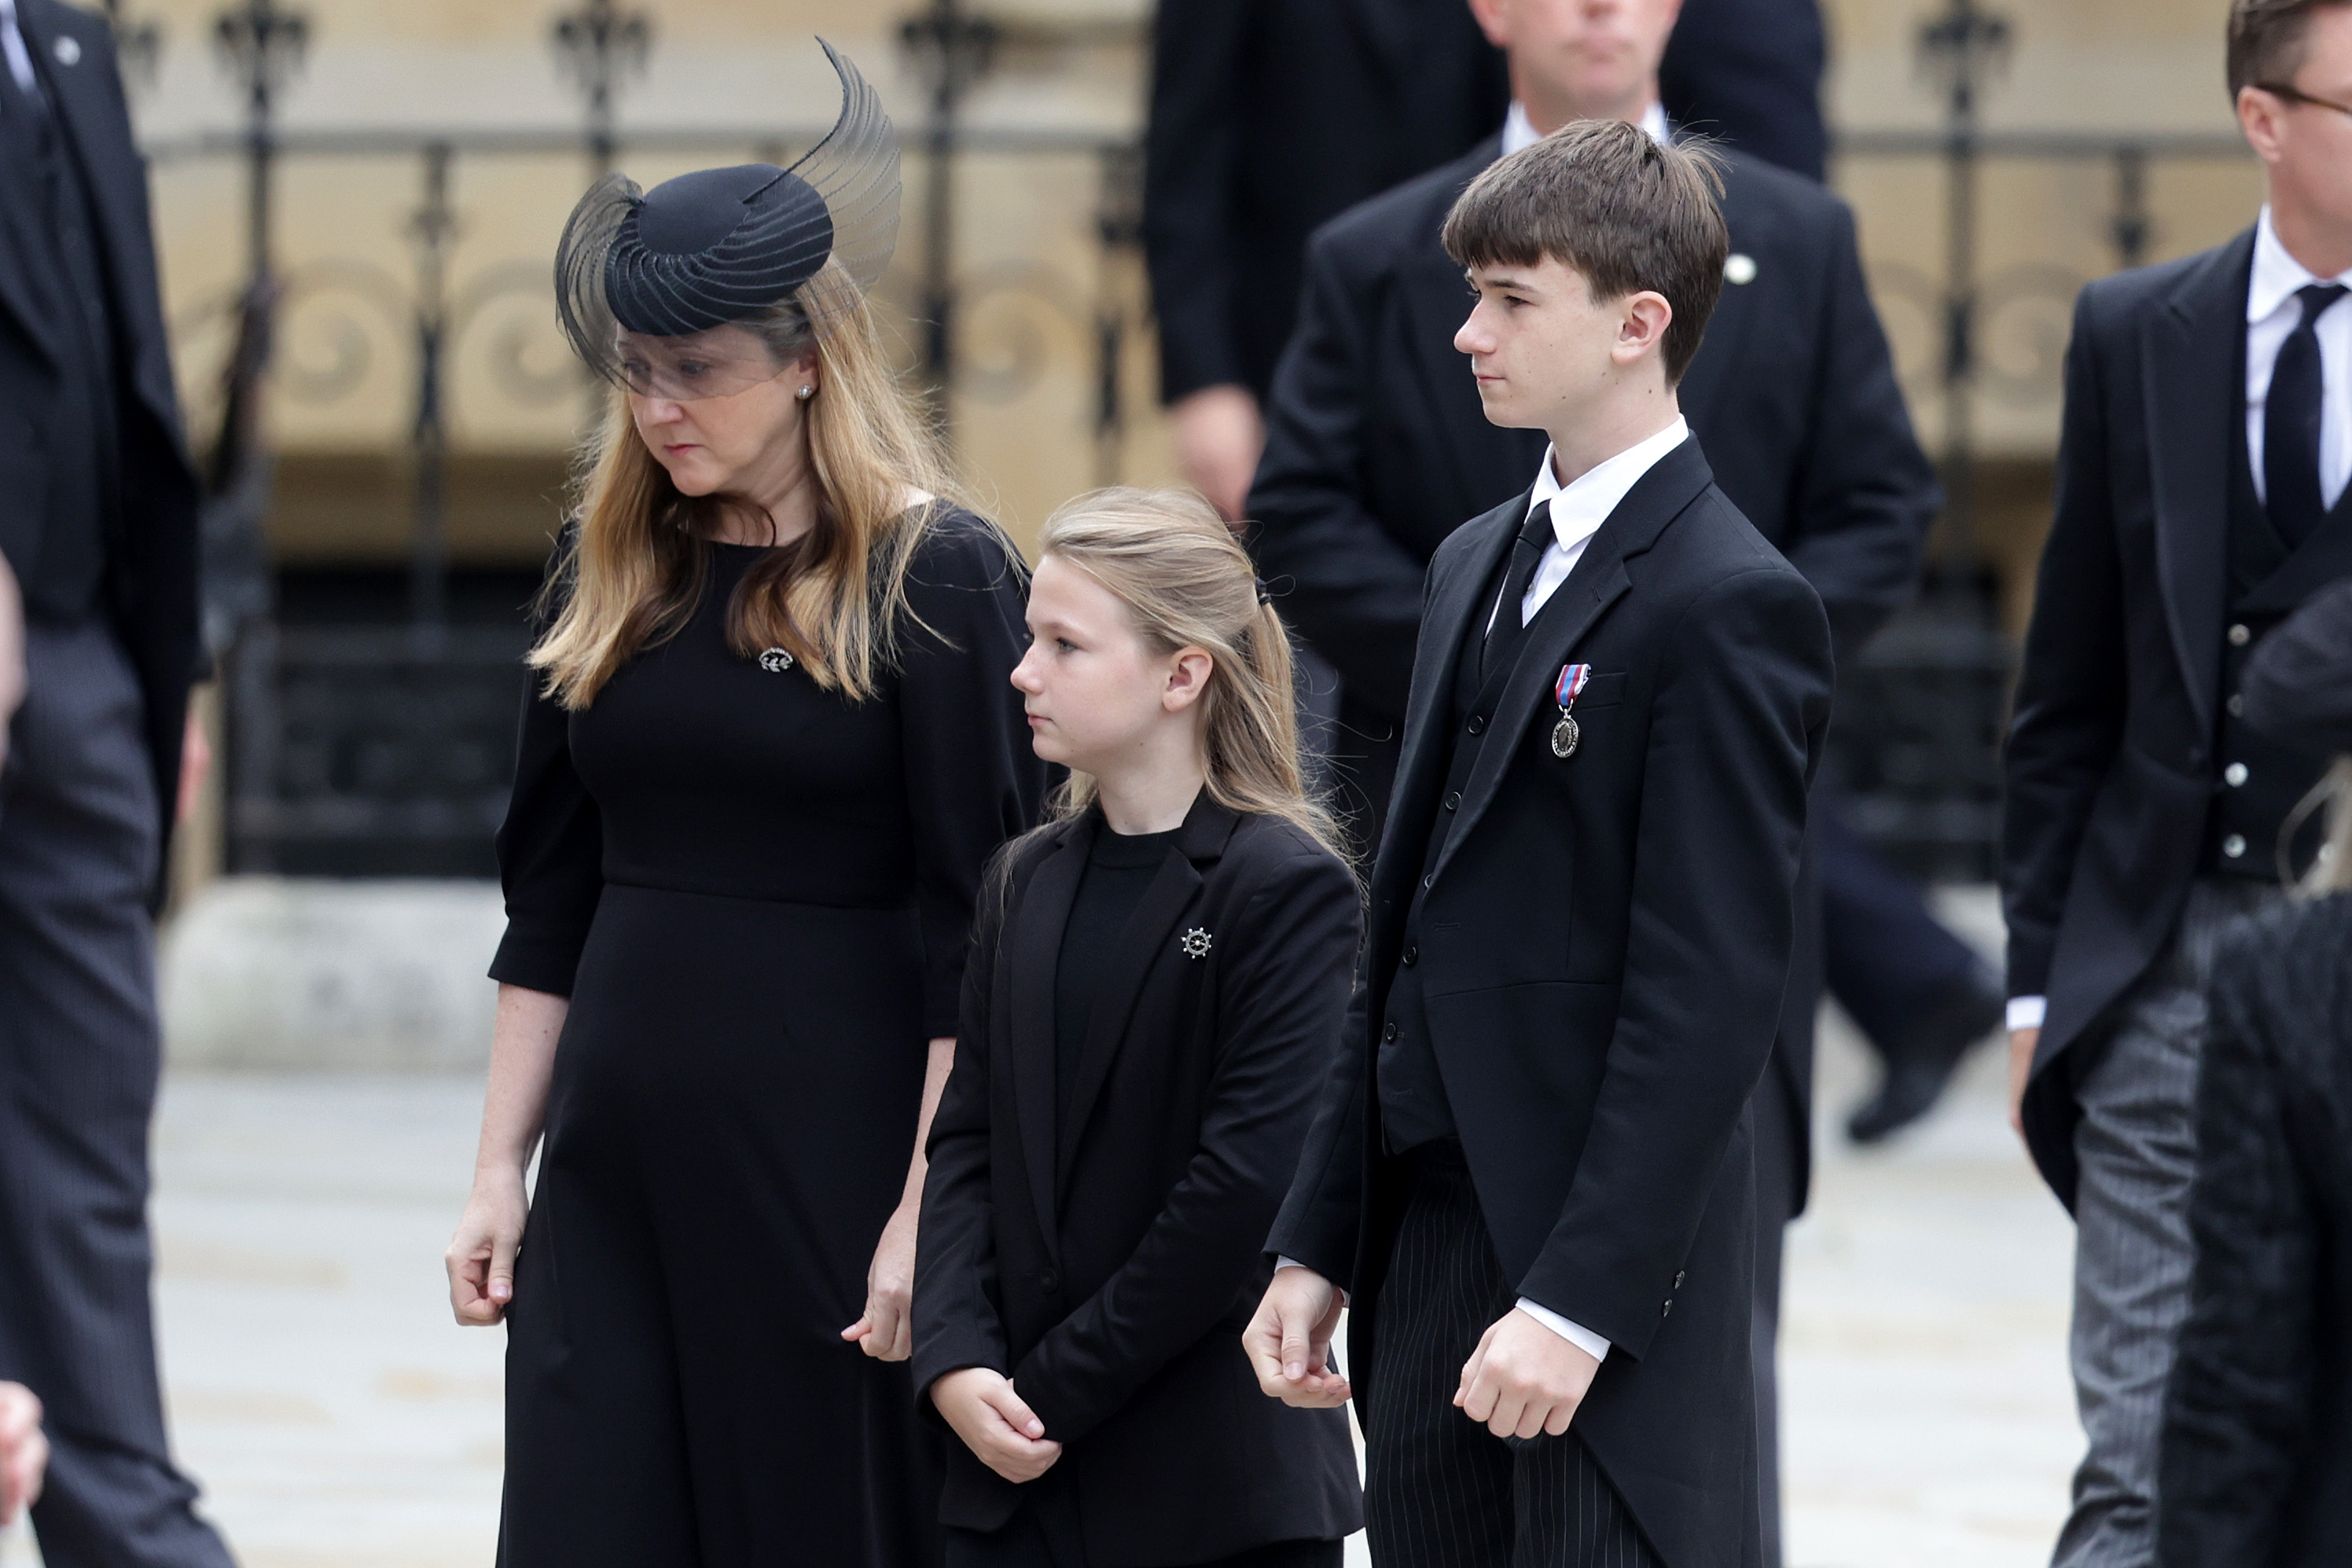 <p>The children of Alexander Windsor, Earl of Ulster are next up. </p><p>The earl's son — Xan Windsor, Lord Culloden — is 33rd in the line of succession. His daughter, Lady Cosima Windsor, is 34th in the line of succession. </p><p>The young royals, who are the grandchildren of Prince Richard, Duke of Gloucester — a first cousin of the late Queen Elizabeth II — are seen here with their mother, Claire, the Countess of Ulster.</p>